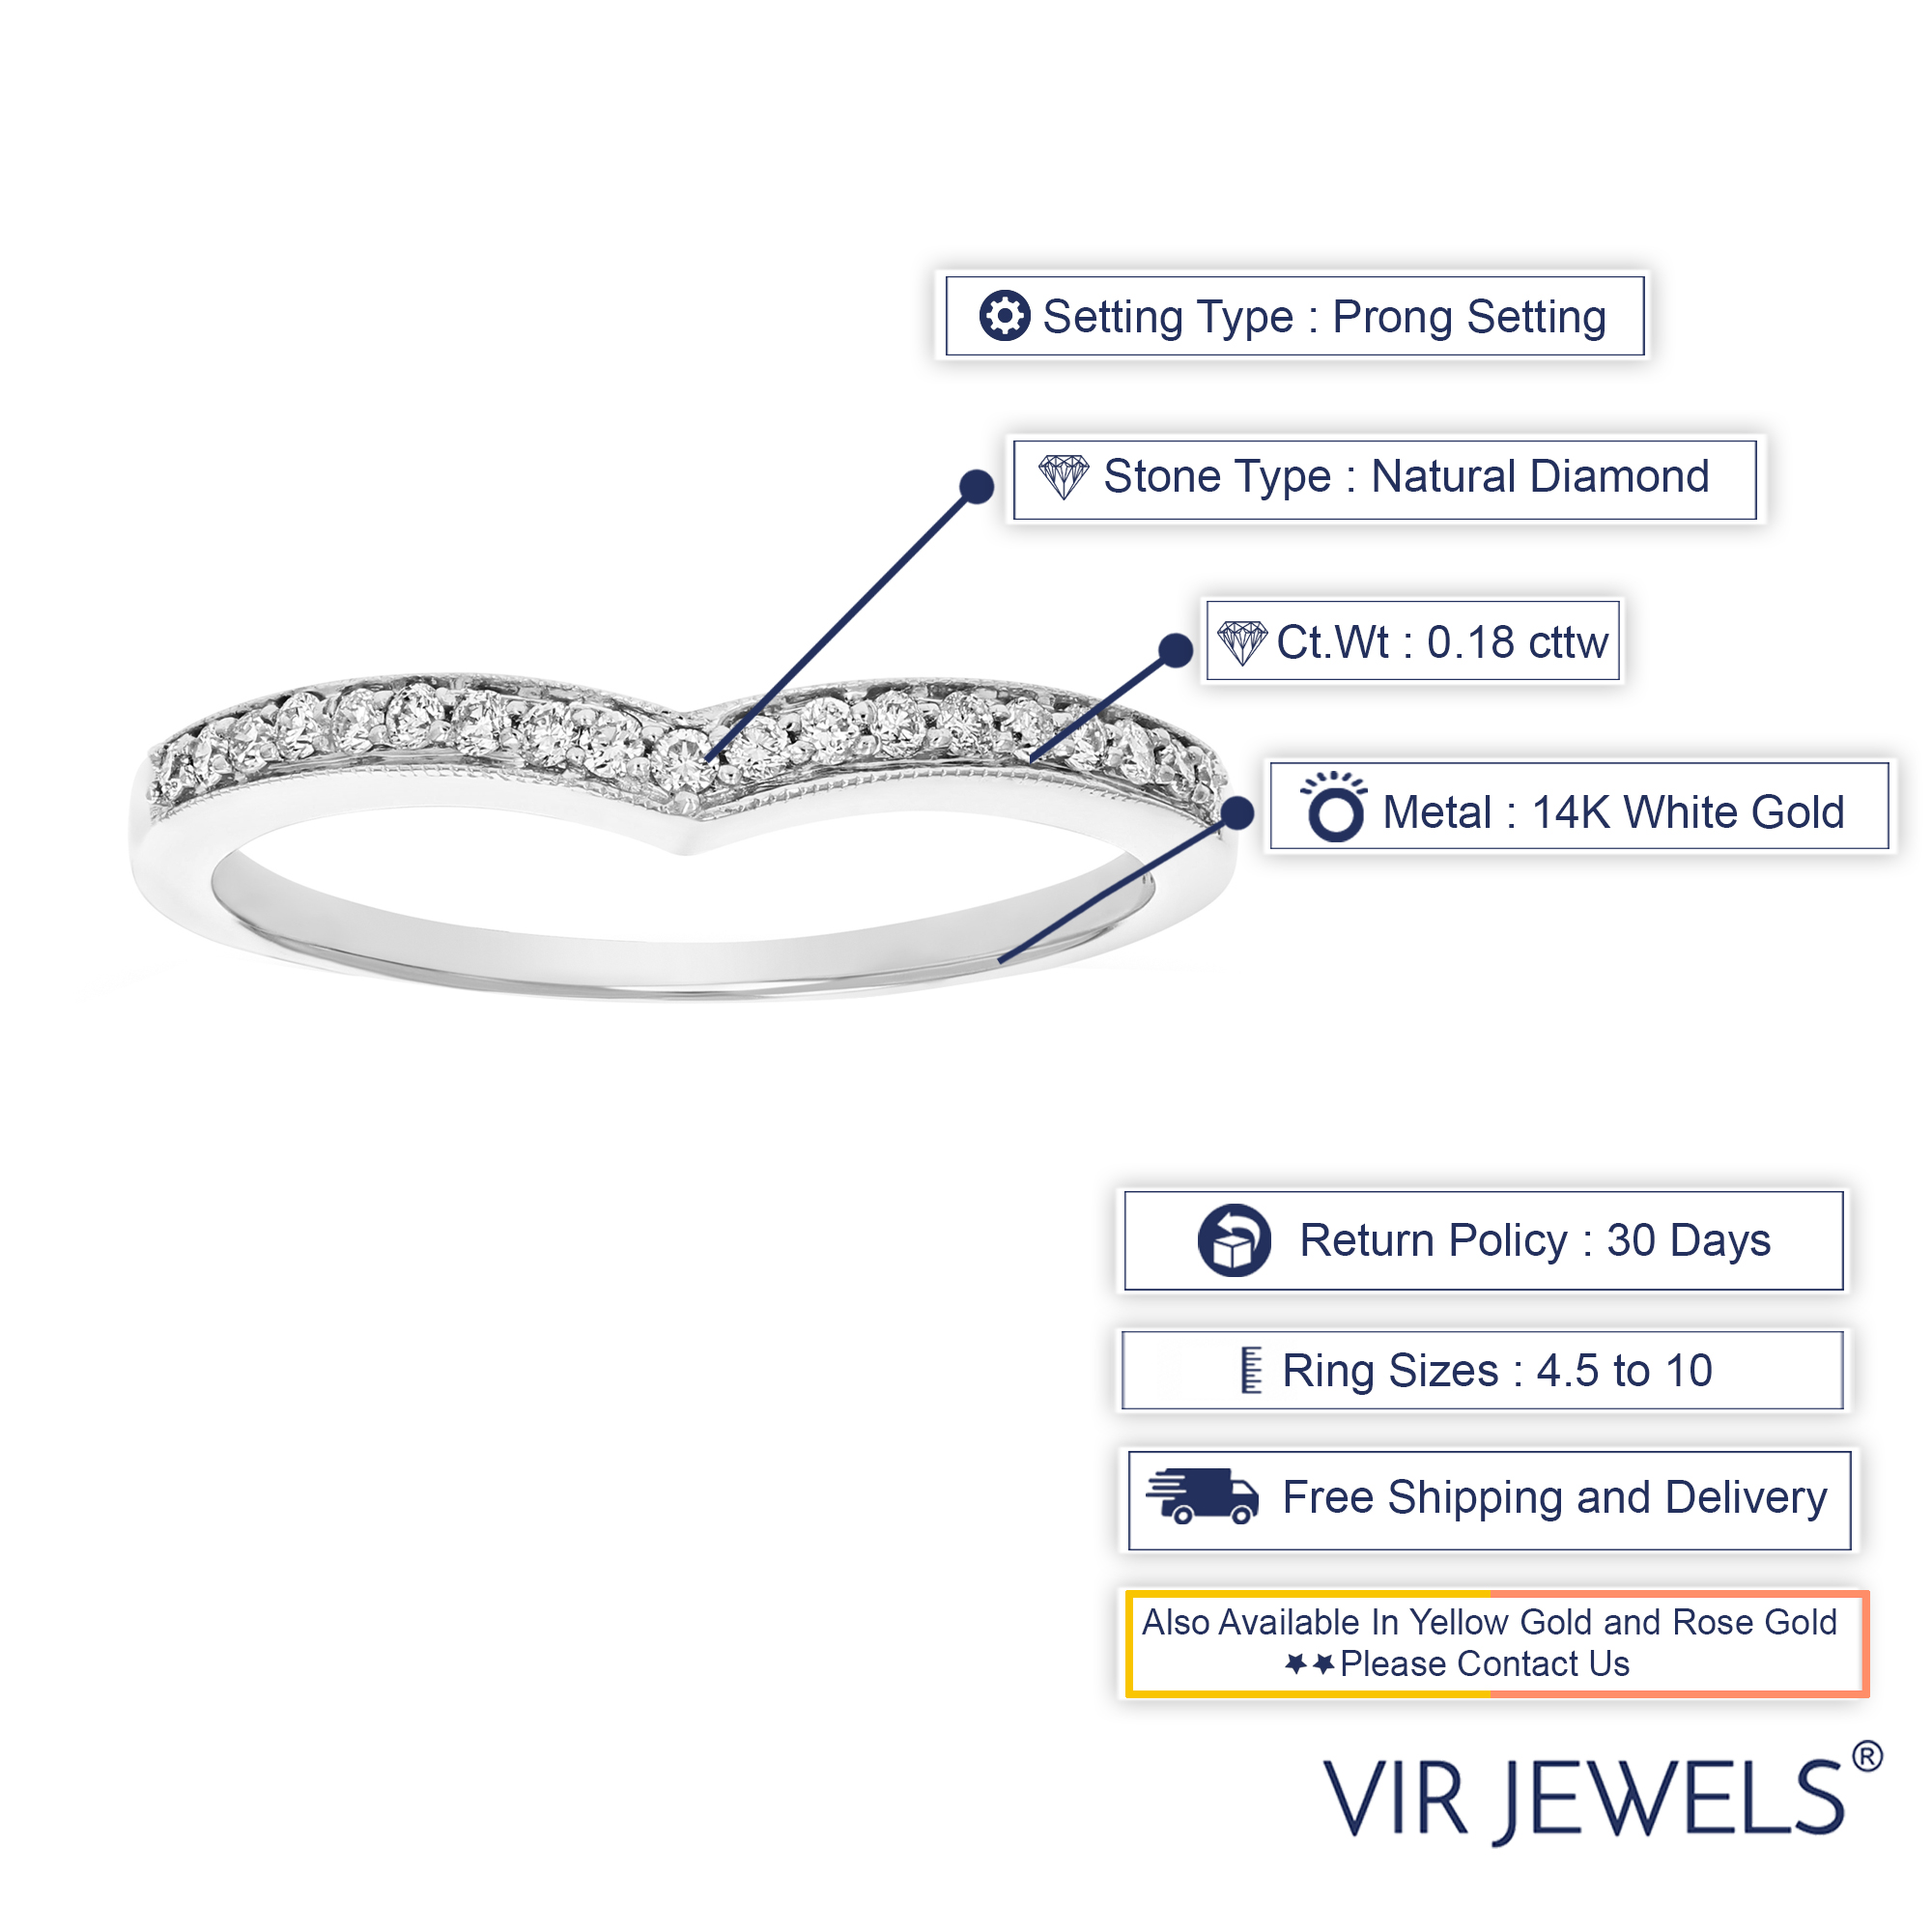 Vir Jewels 0.18 cttw to 1 cttw Diamond Wedding Band for Women, V Shape Round Diamond Wedding Band in 14K Gold with Milgrain, Size 4.5-10